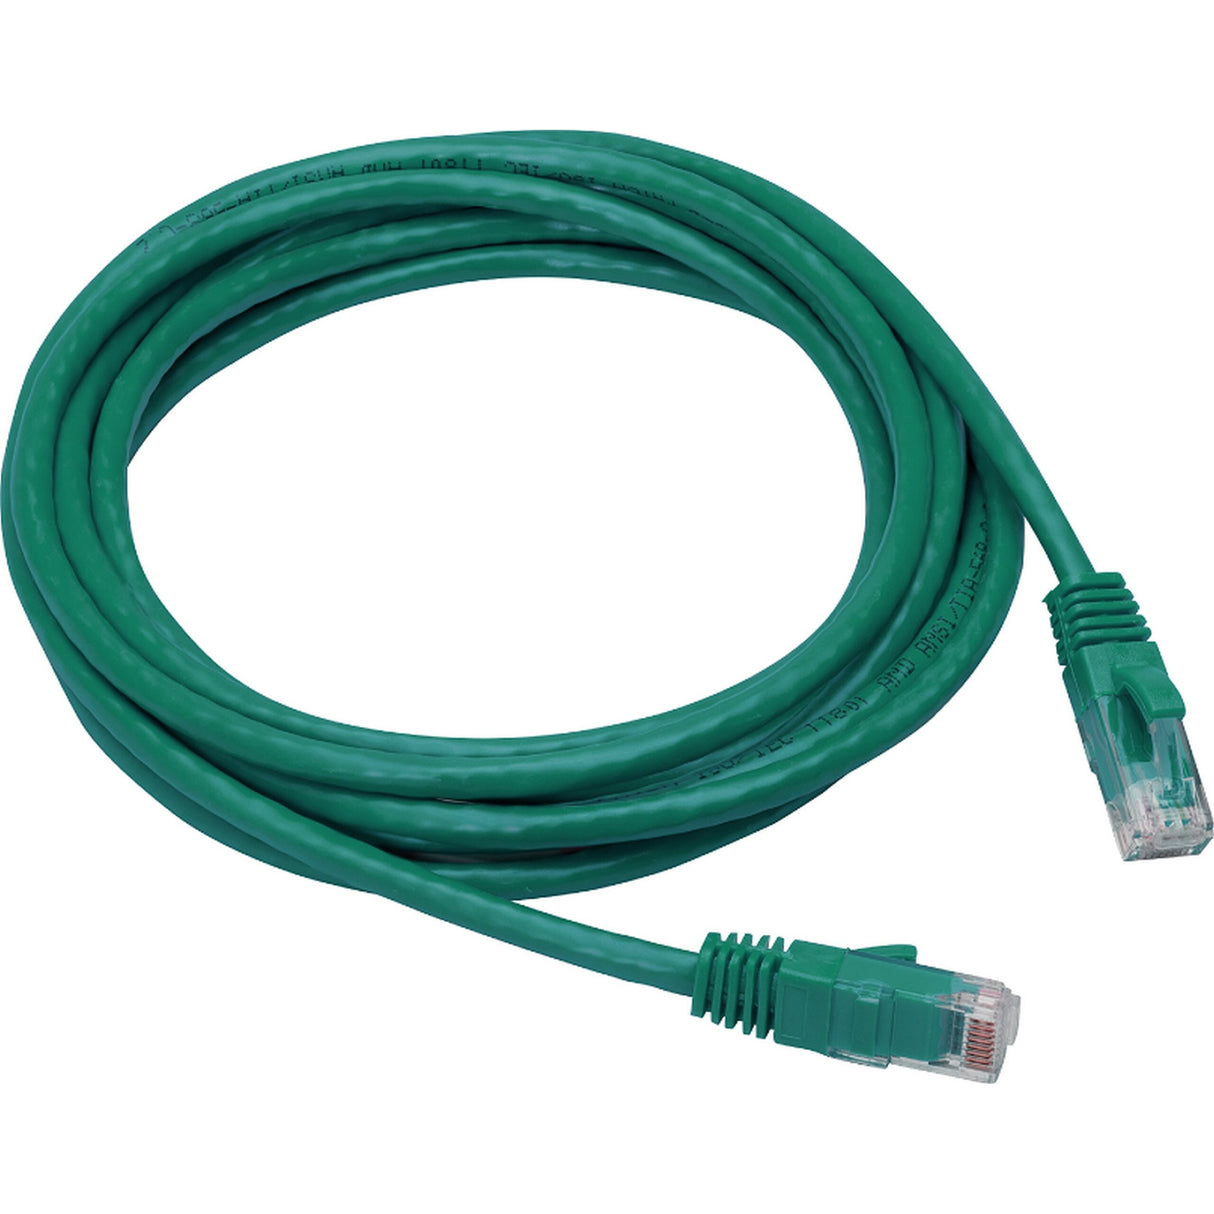 Liberty AV 152G5U5015 Category 5E True 24AWG Patch Cable, 15 Foot, Green